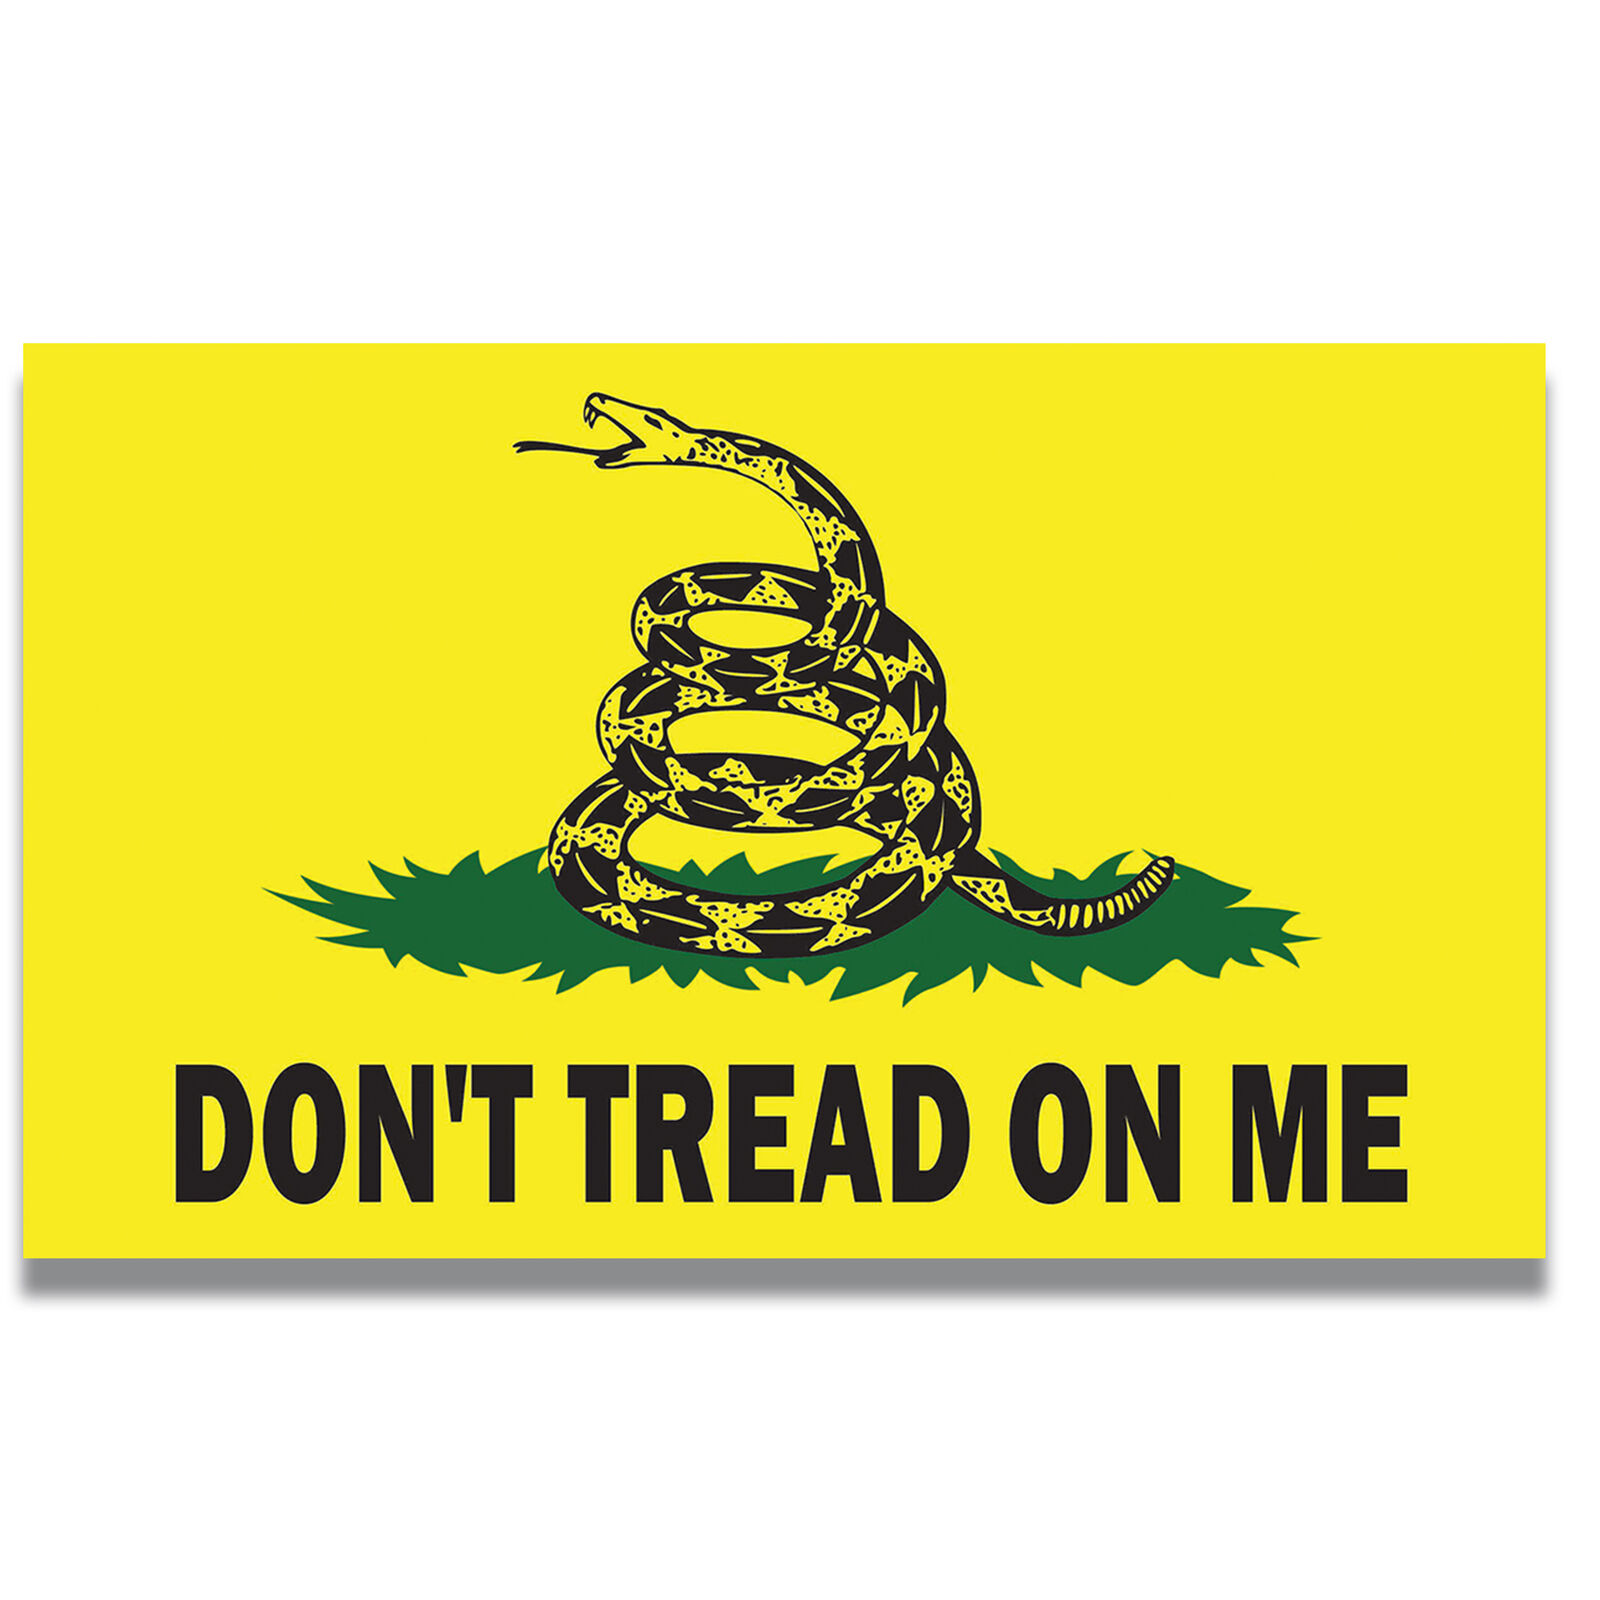 Don't Tread on Me Gadsden Flag Magnet Decal, 5x8 Inches, Yellow, Green, Black